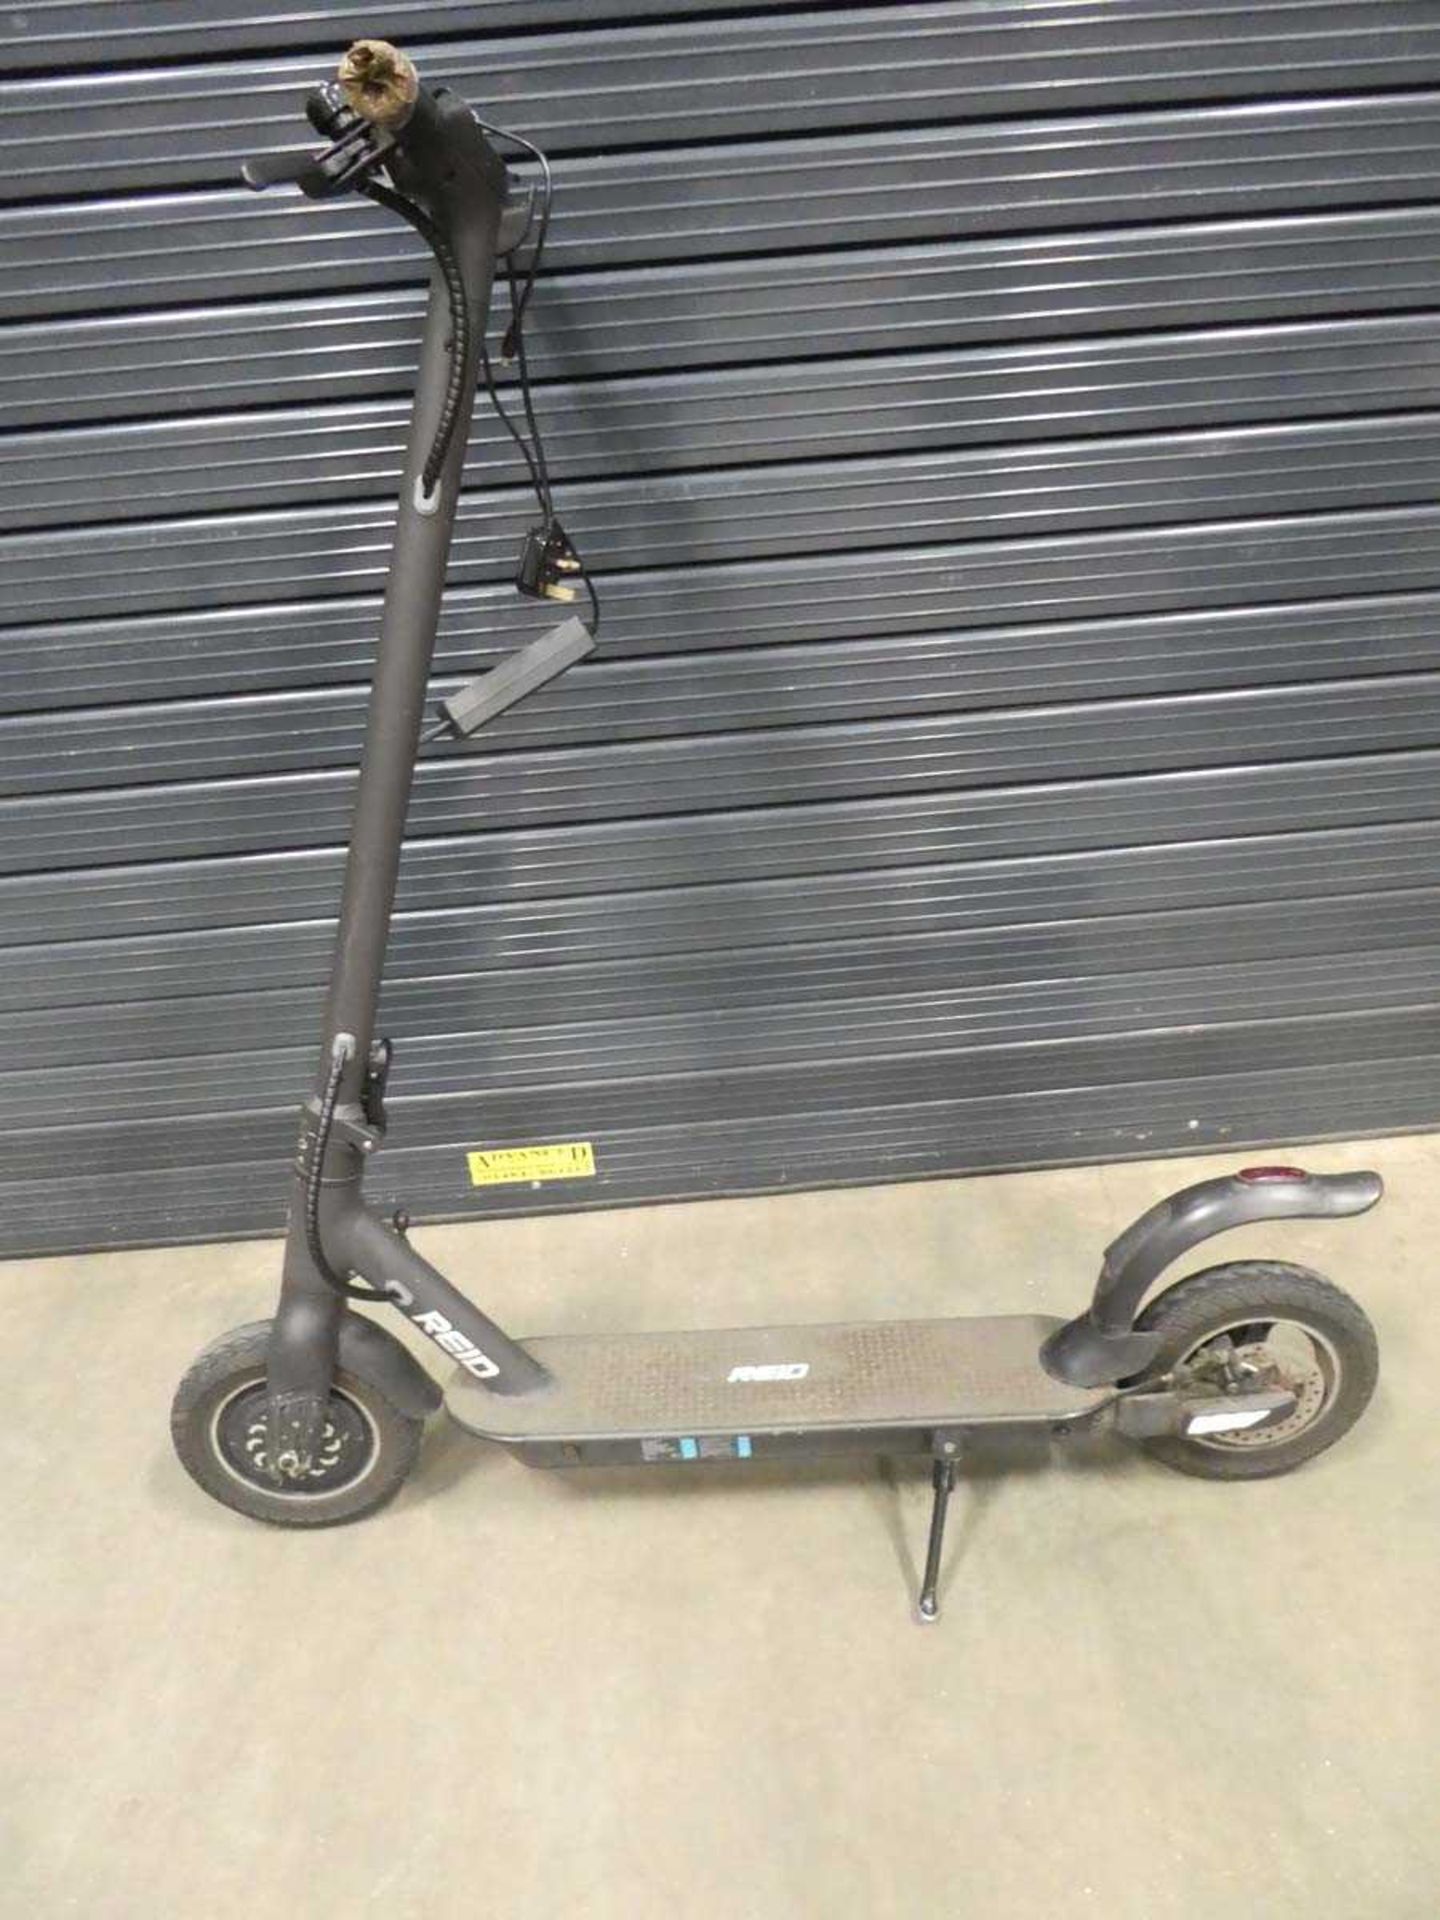 Reid electric scooter with charger